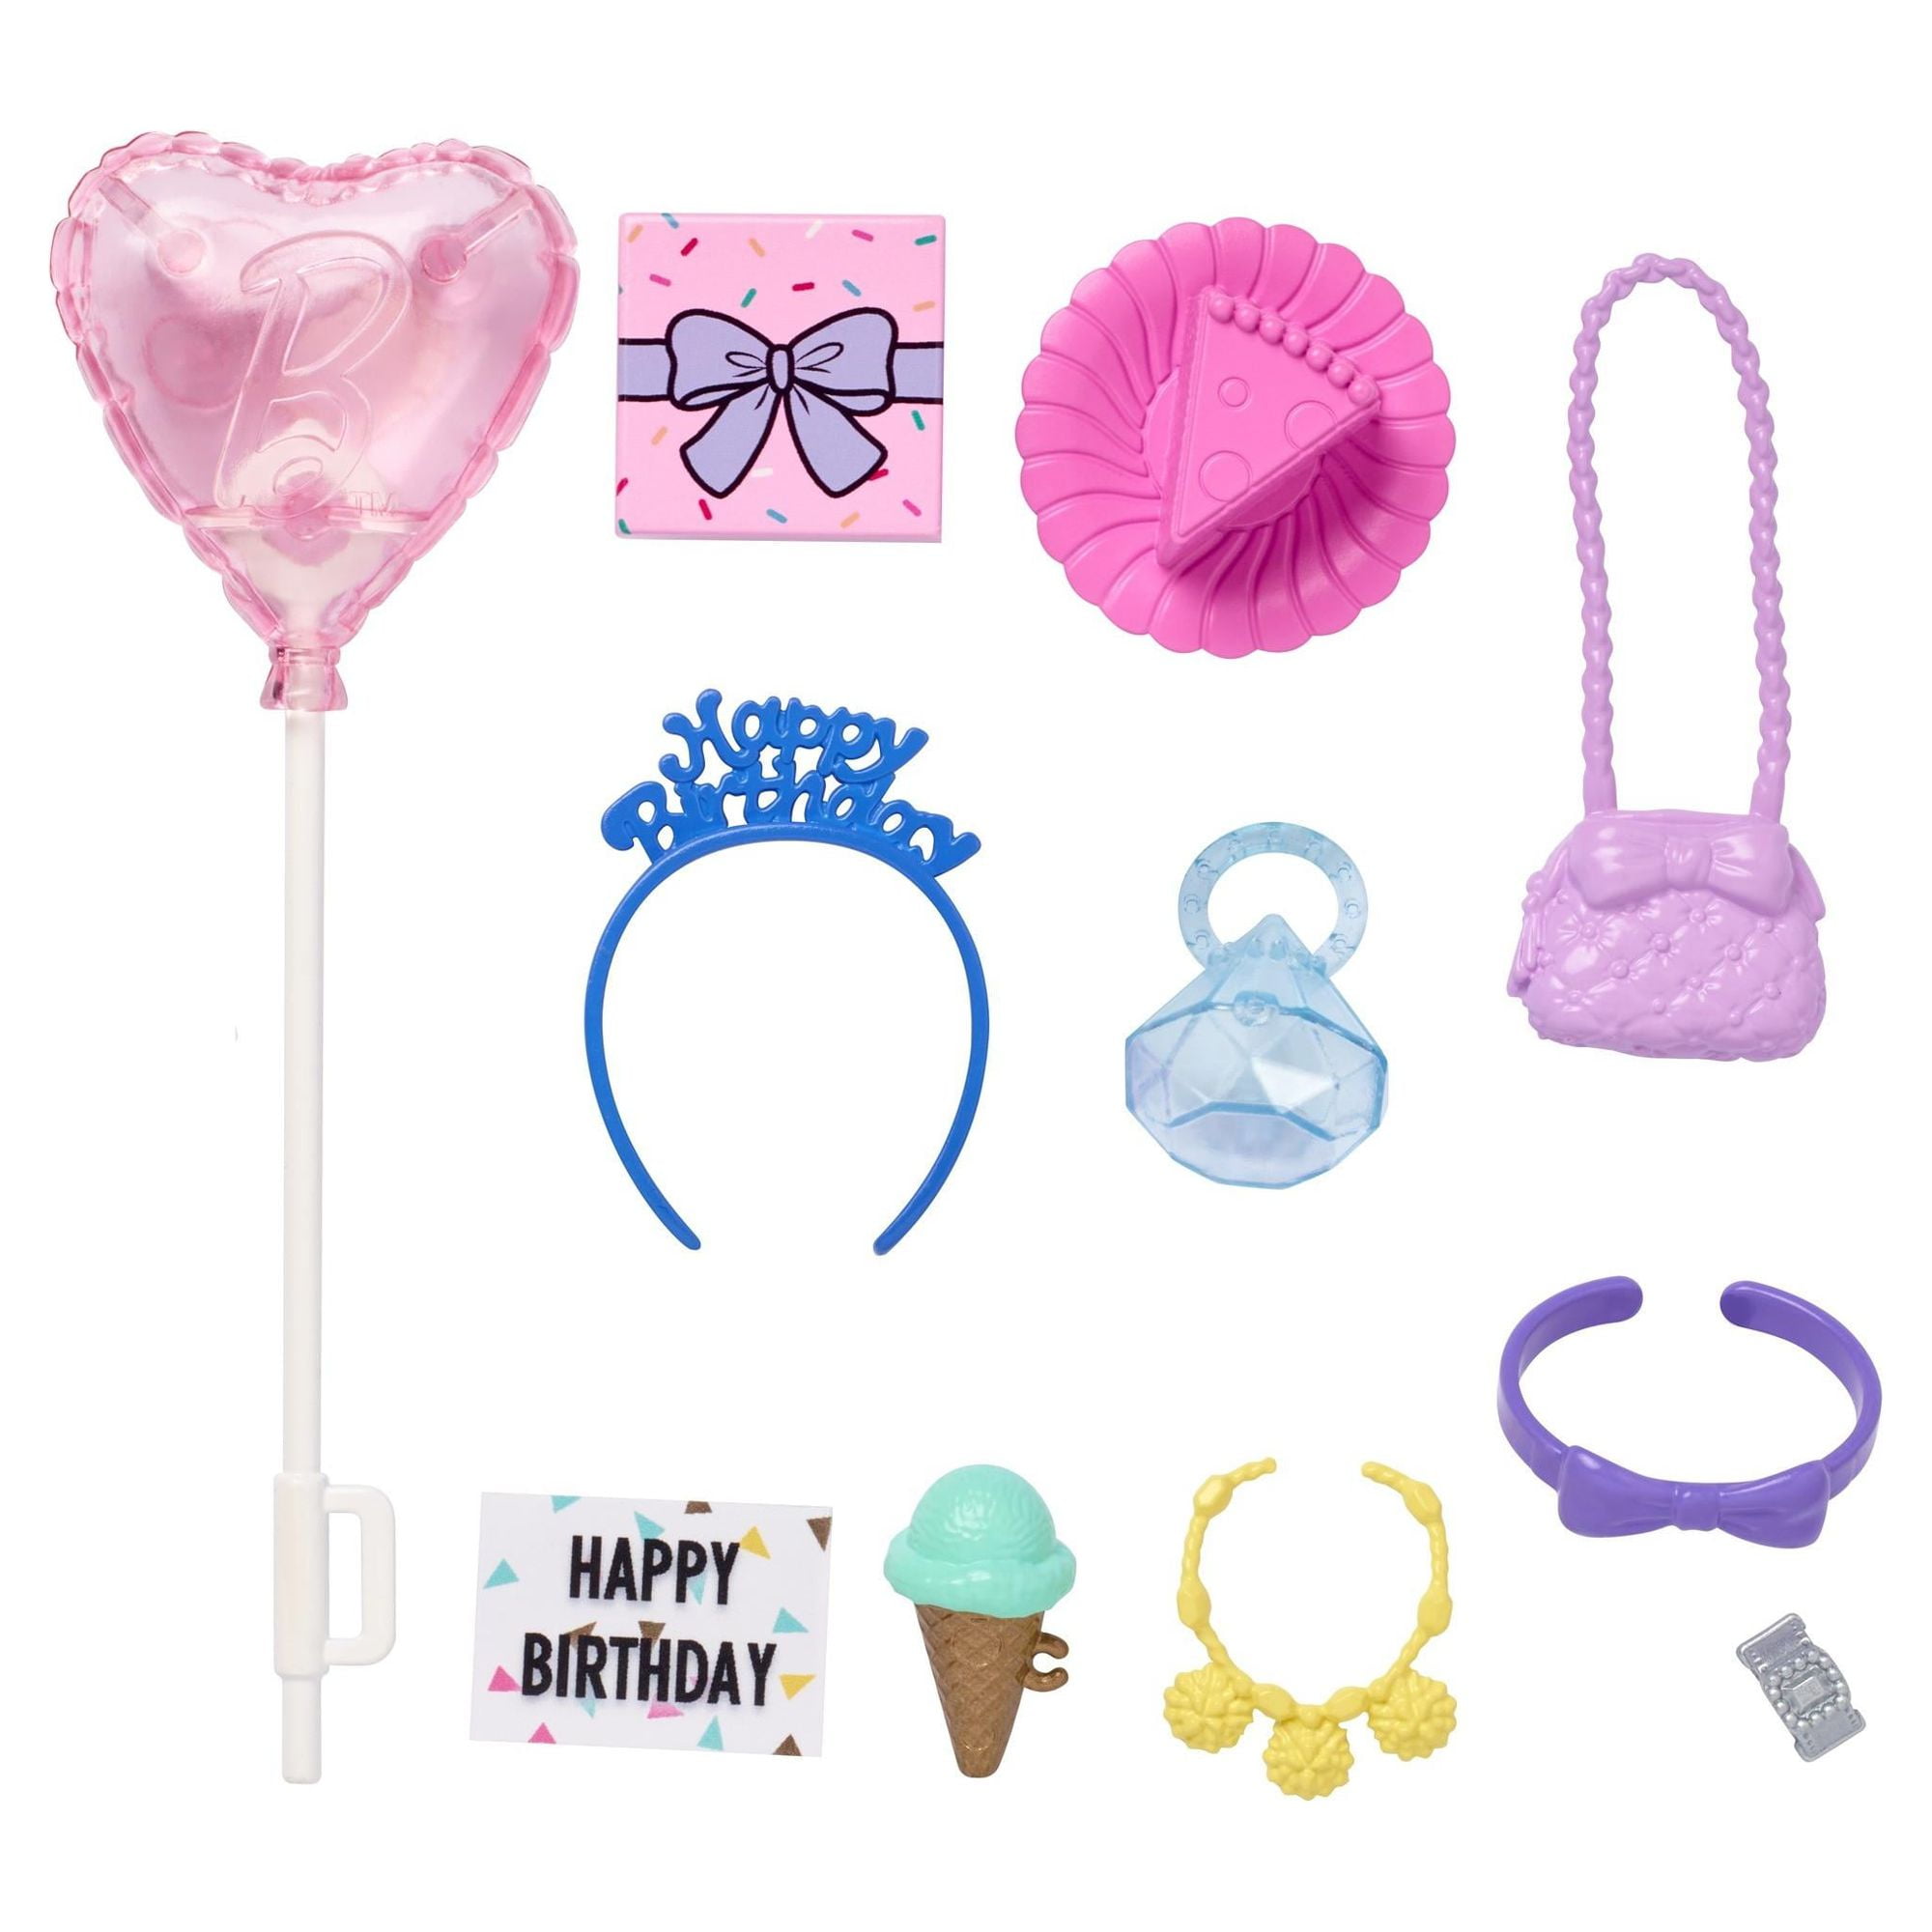 Barbie Accessories Travel Pack With 11 Storytelling Pieces For Barbie –  shop.generalstorespokane